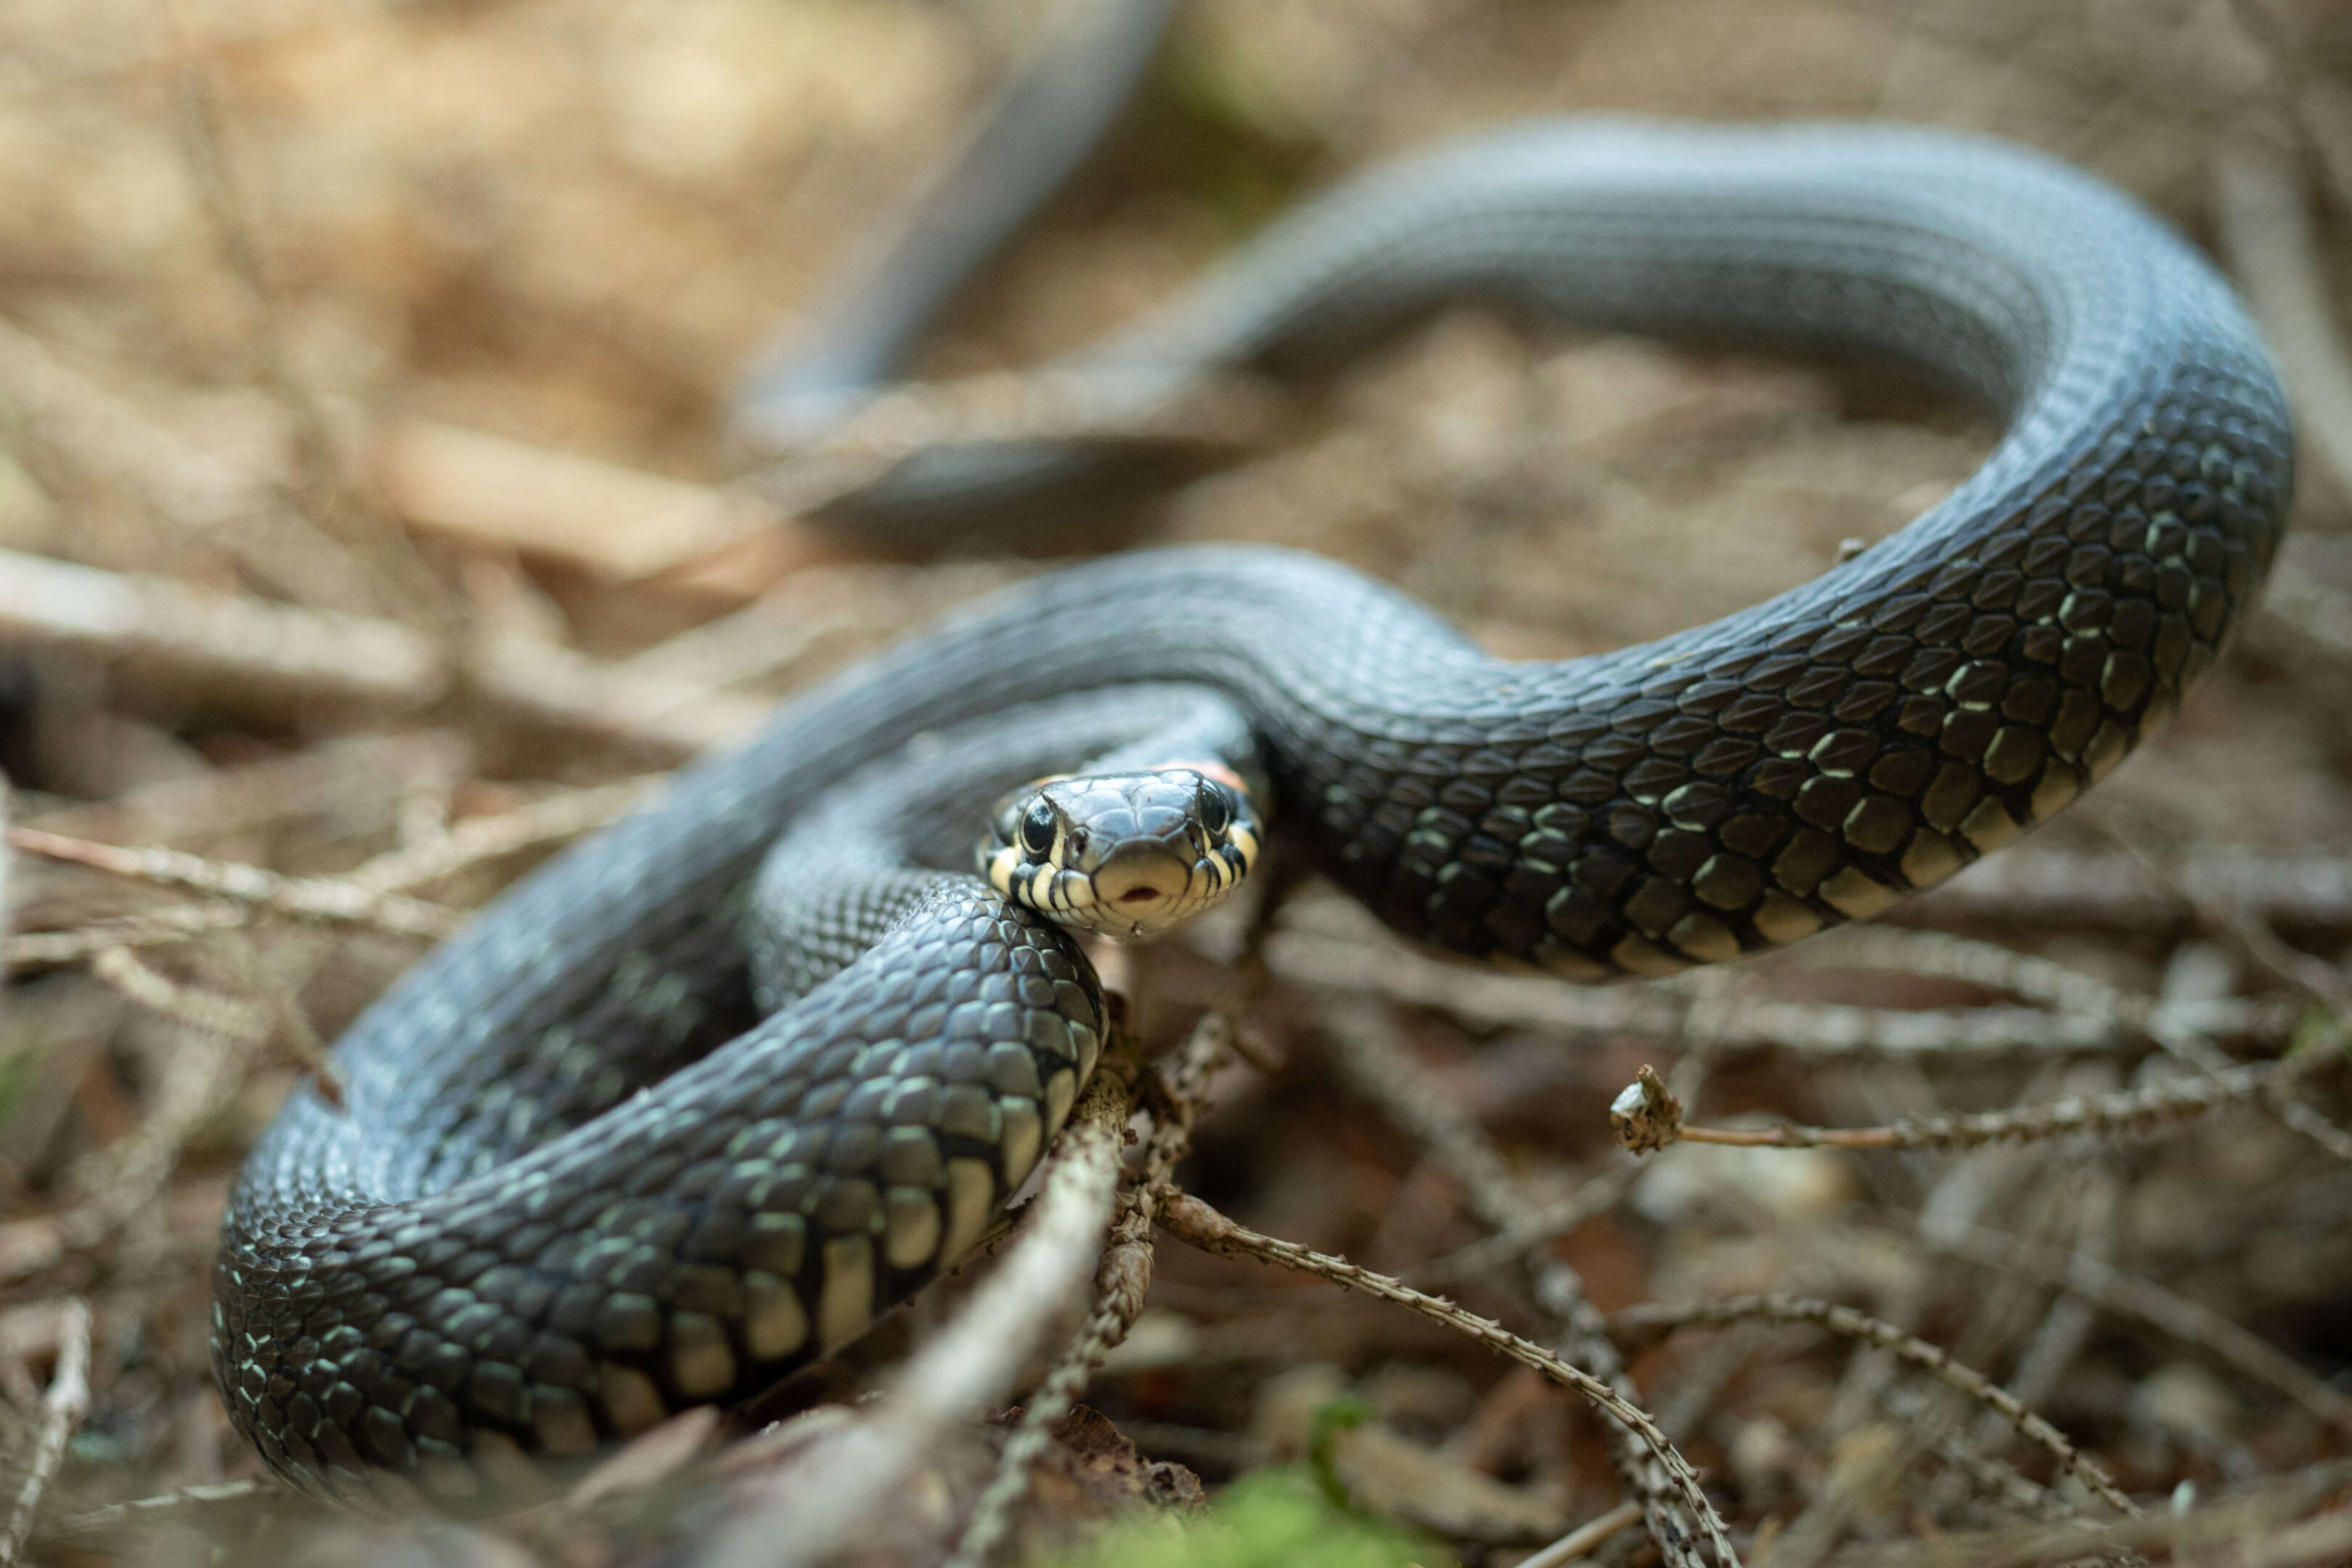 Image of Grass snakes